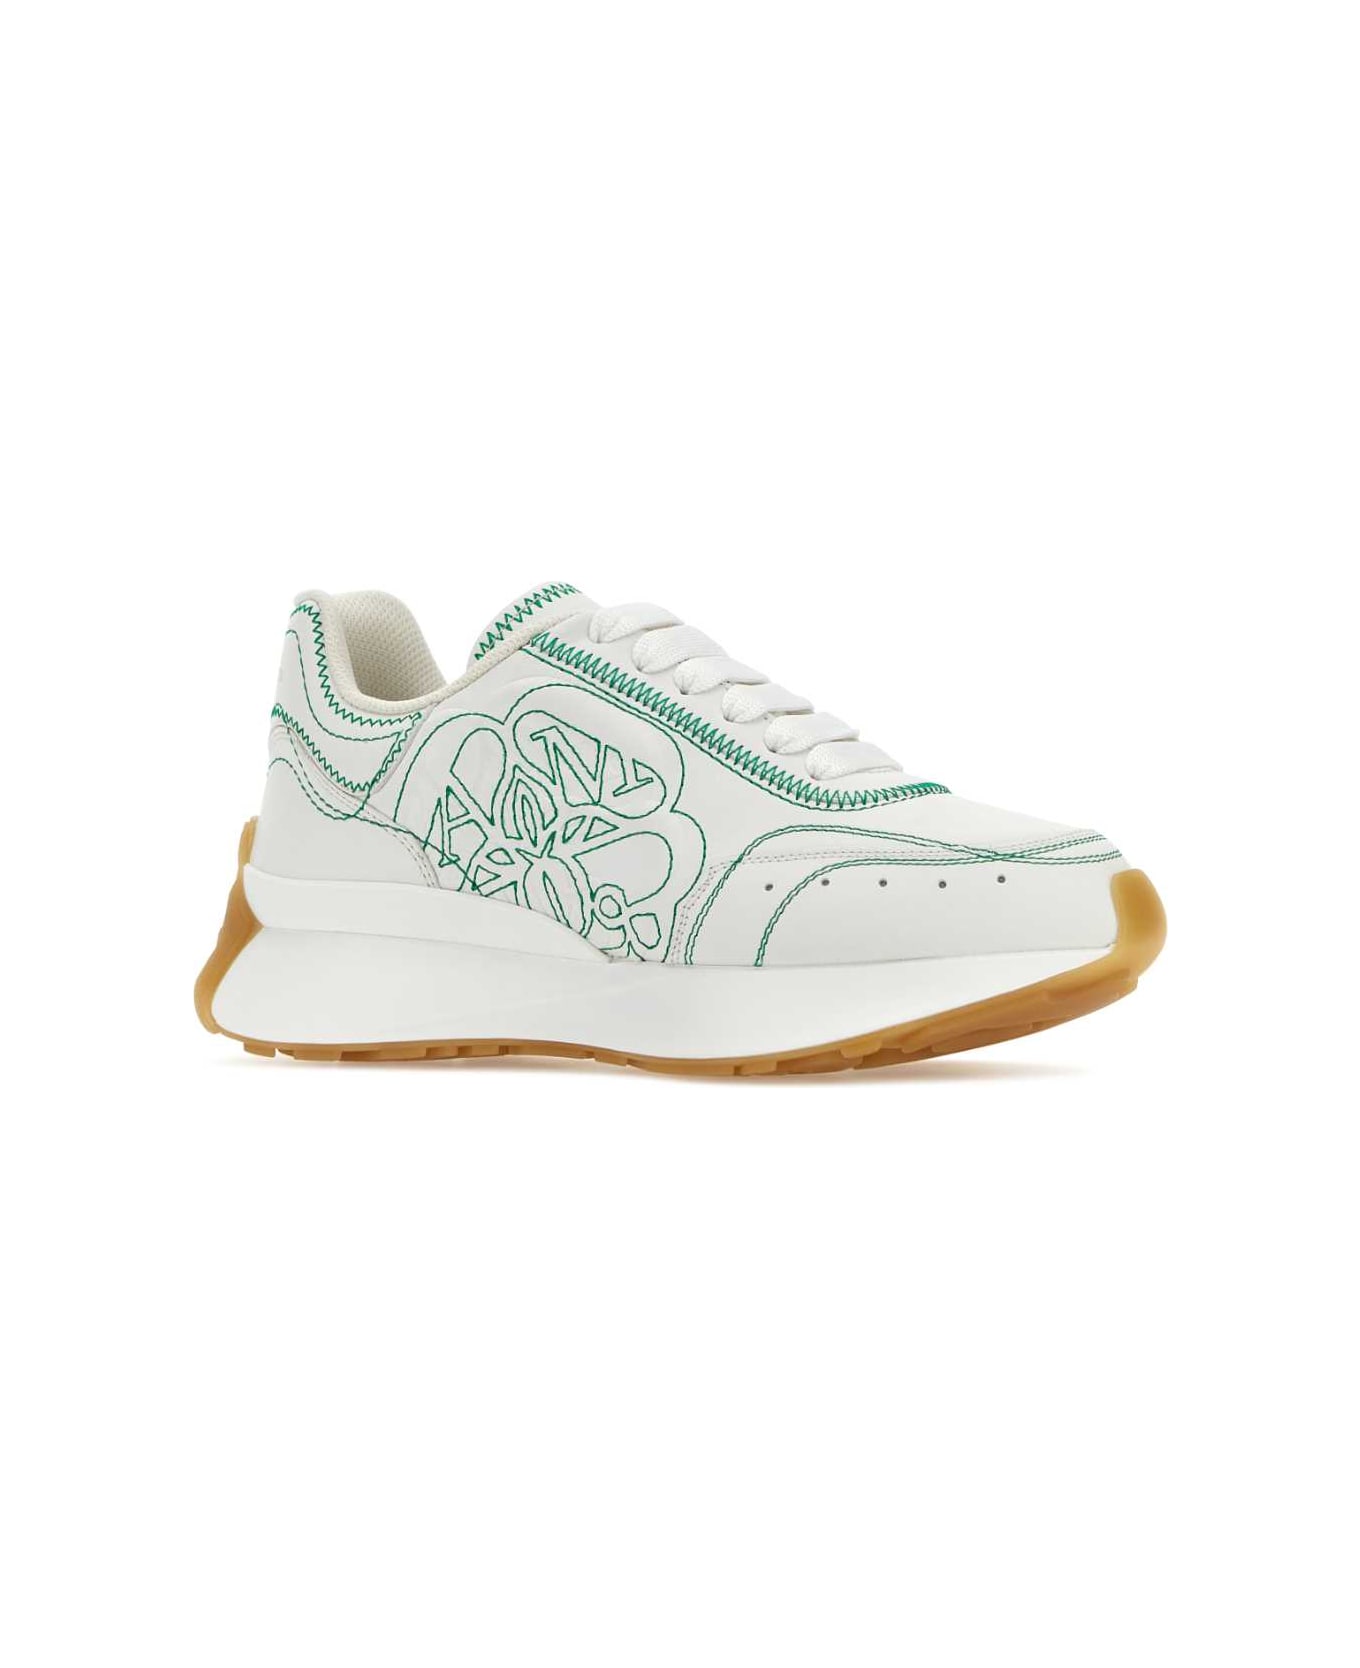 Alexander McQueen White Leather Sneakers - WHISILBRGREAM スニーカー